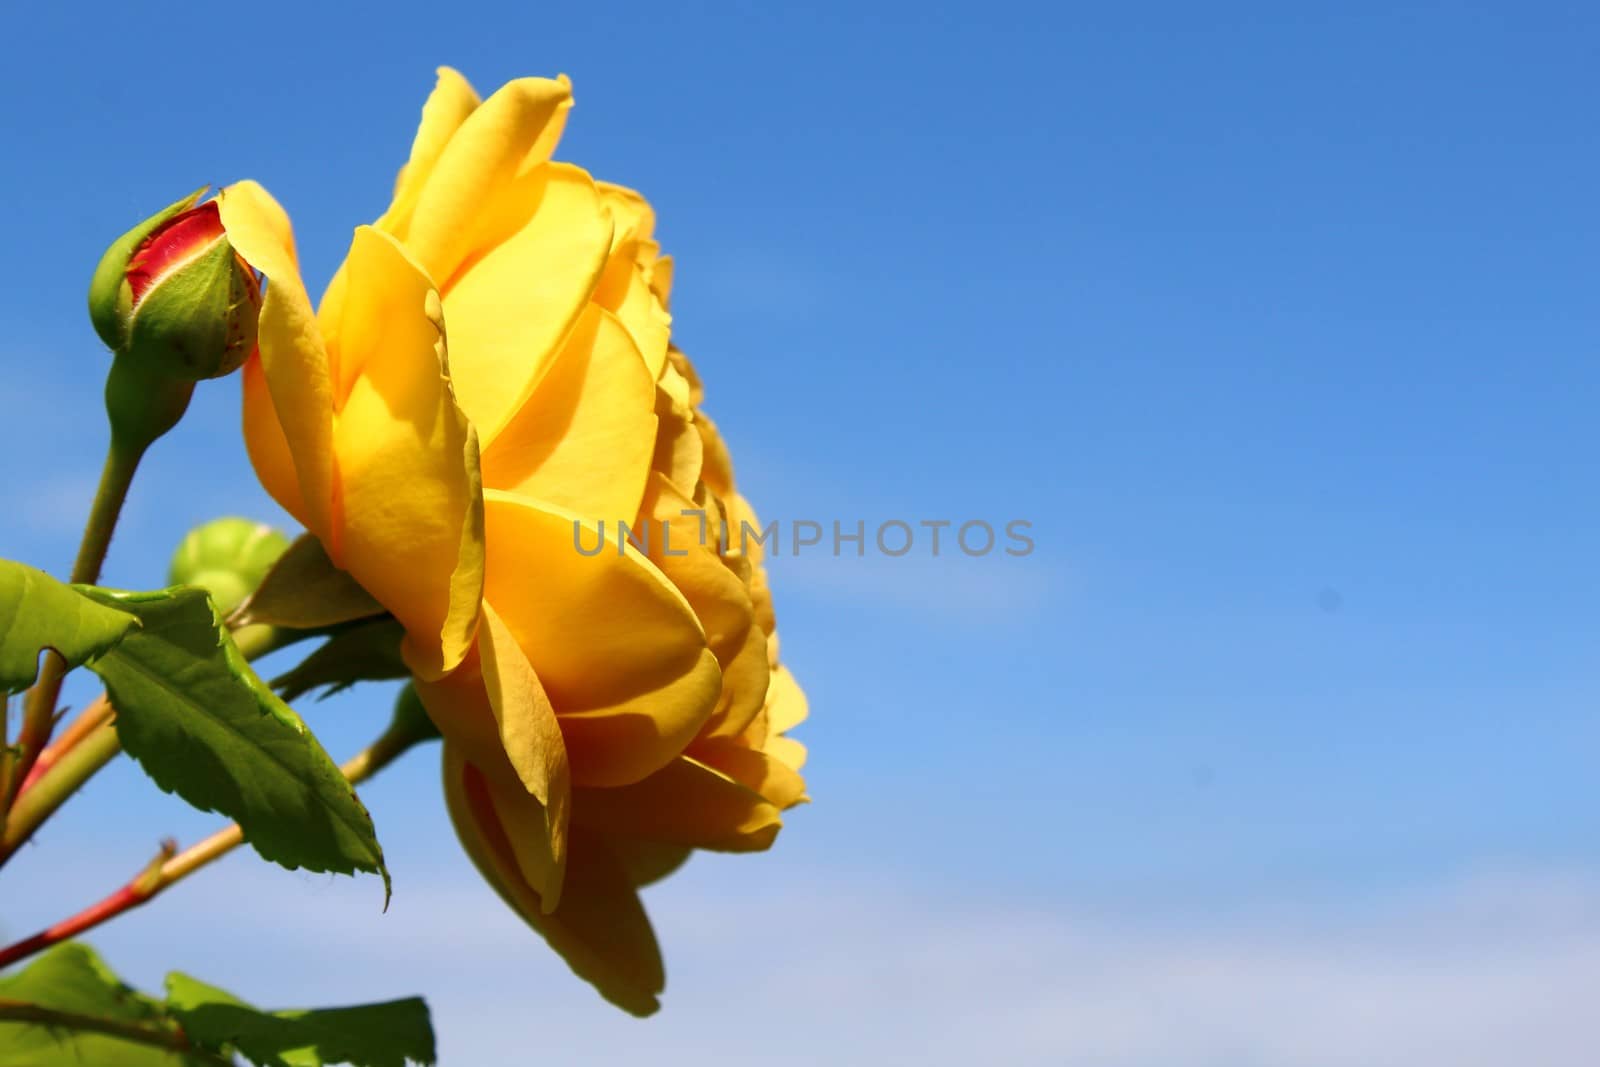 yellow rose in front of blue sky by martina_unbehauen